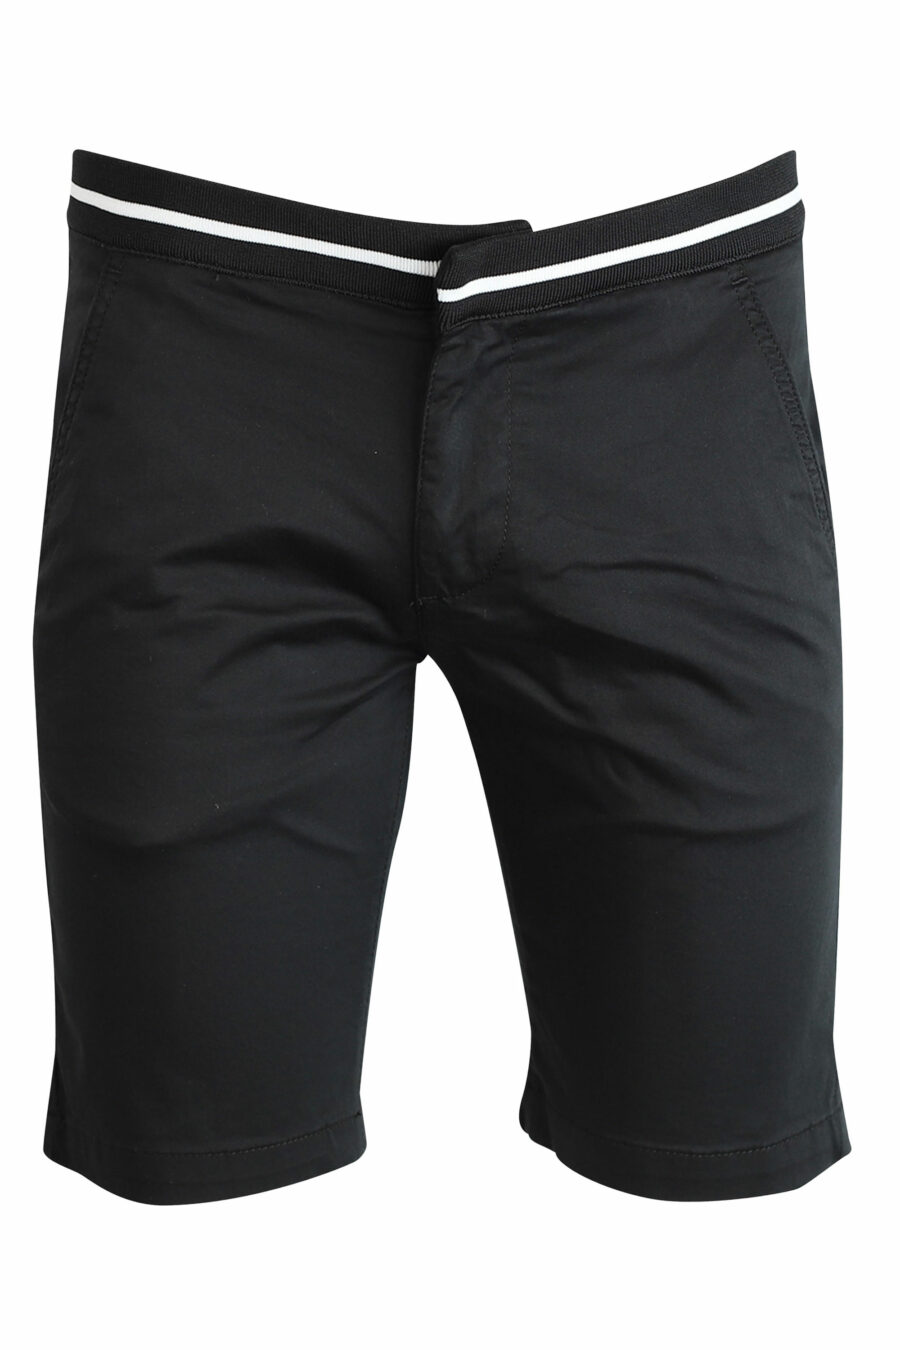 Black shorts with white detail - 4062226164863